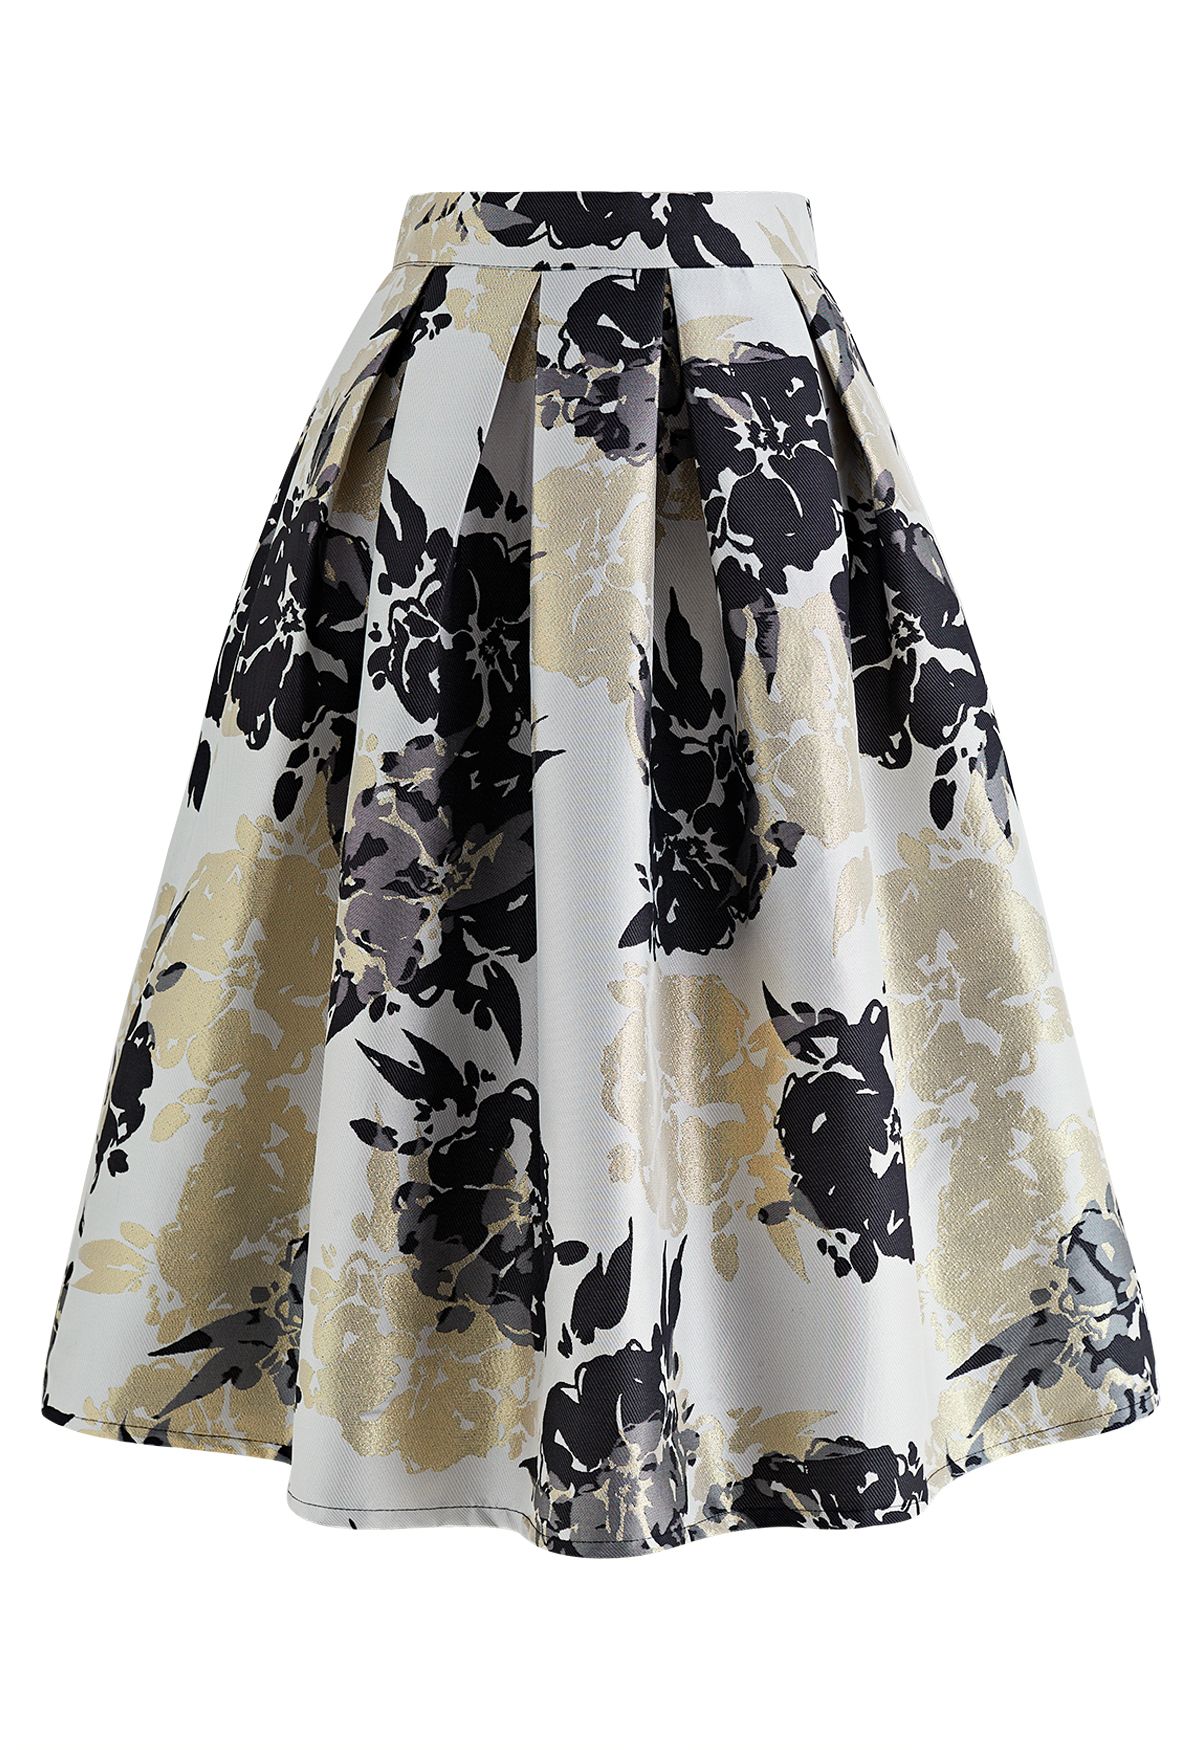 Blooming Floral Jacquard Pleated Midi Skirt in Black